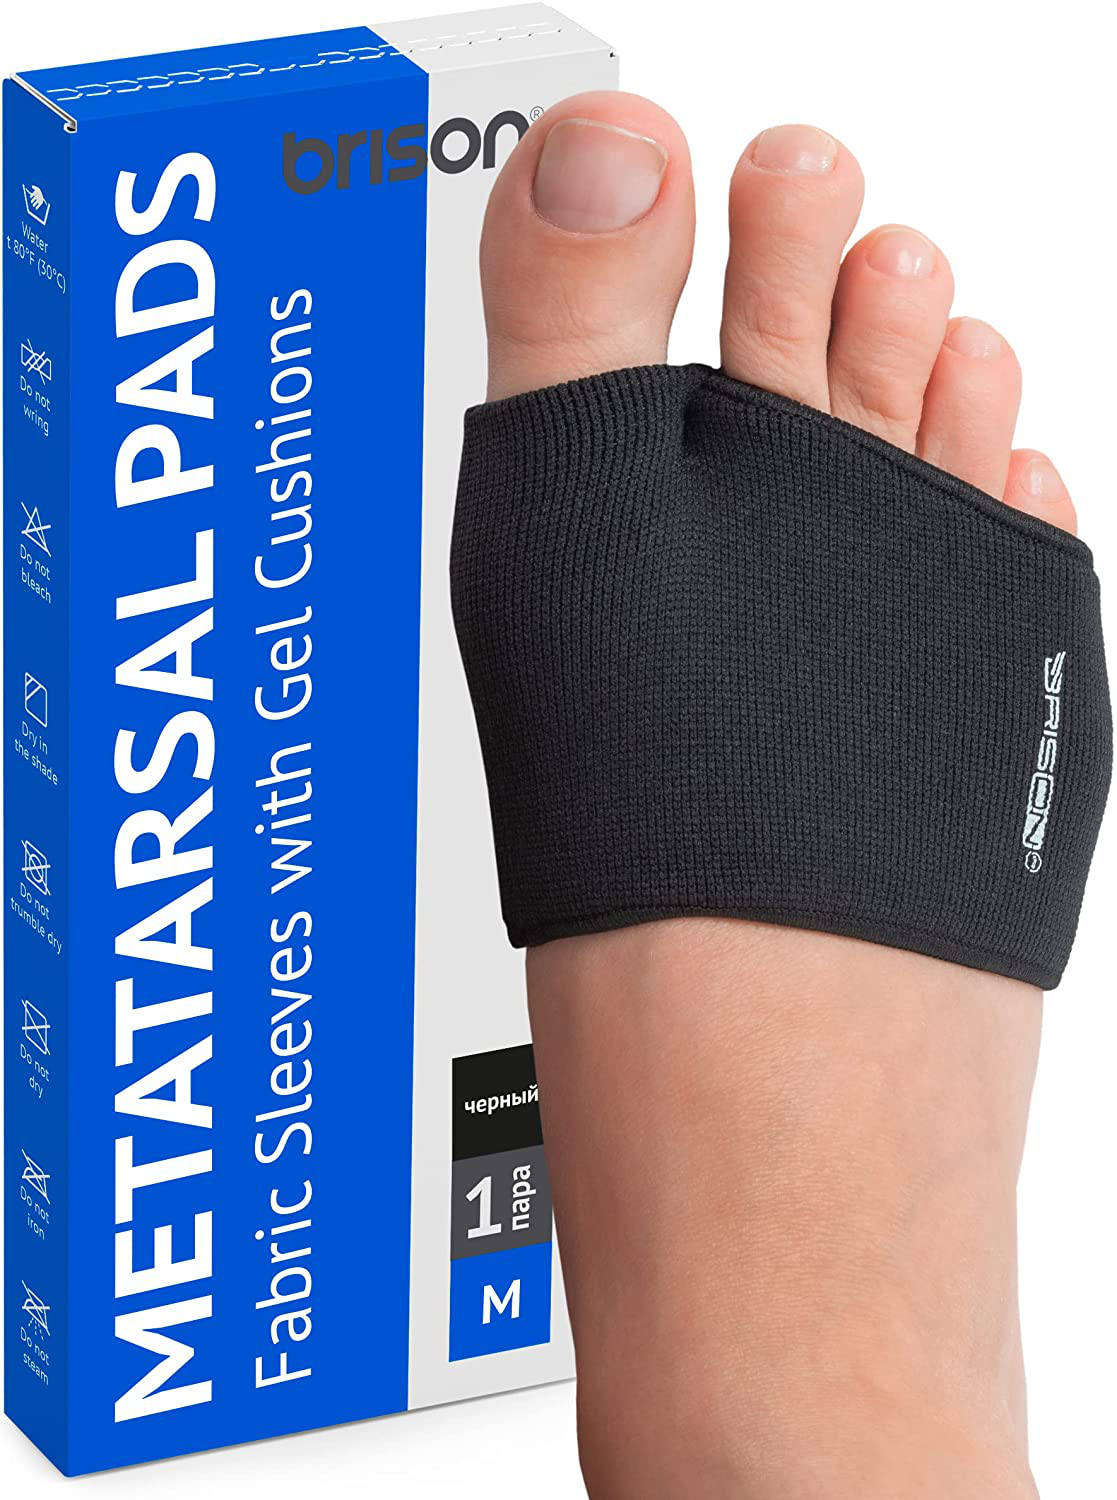 Metatarsal Pads - Gel Sleeves Forefoot Cushion Pads - Fabric Soft Foot Care Ball of Foot Cushions for Bunion Forefoot Blisters Callus Supports Metatarsalgia Pain Relief ( Black ) M